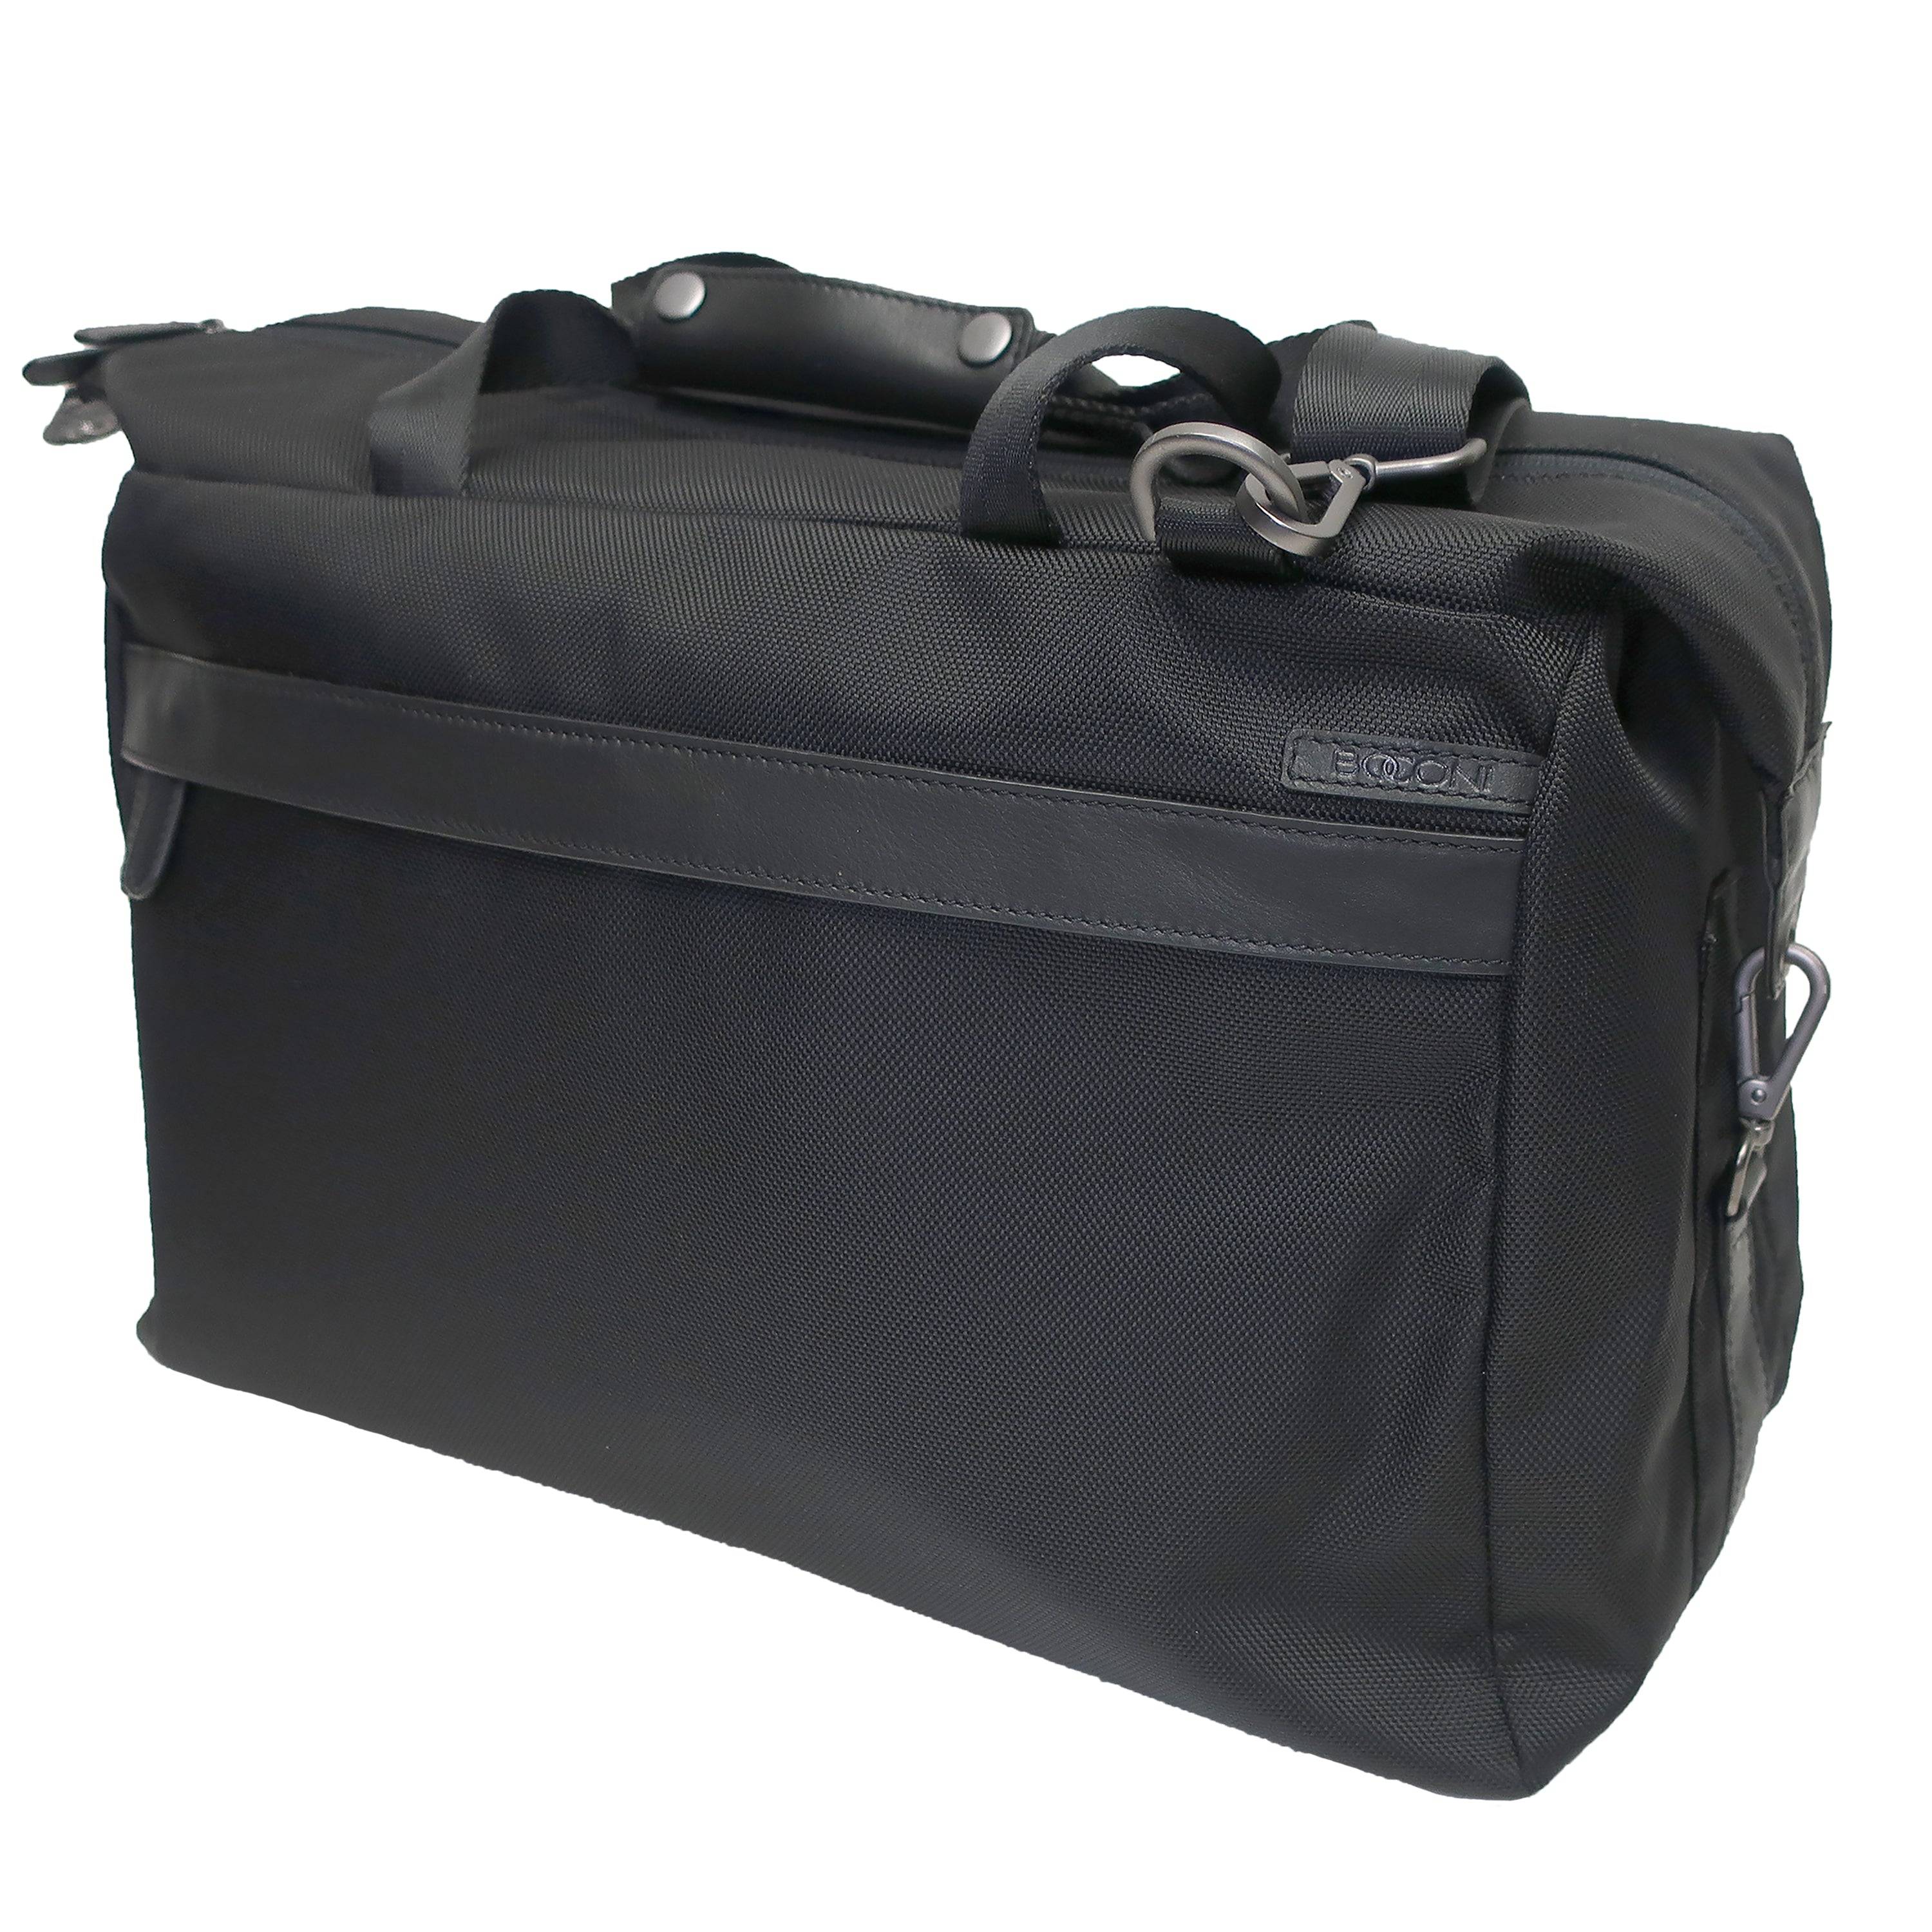 front view of zip pocket on ballistic nylon and leather trim duffel bag